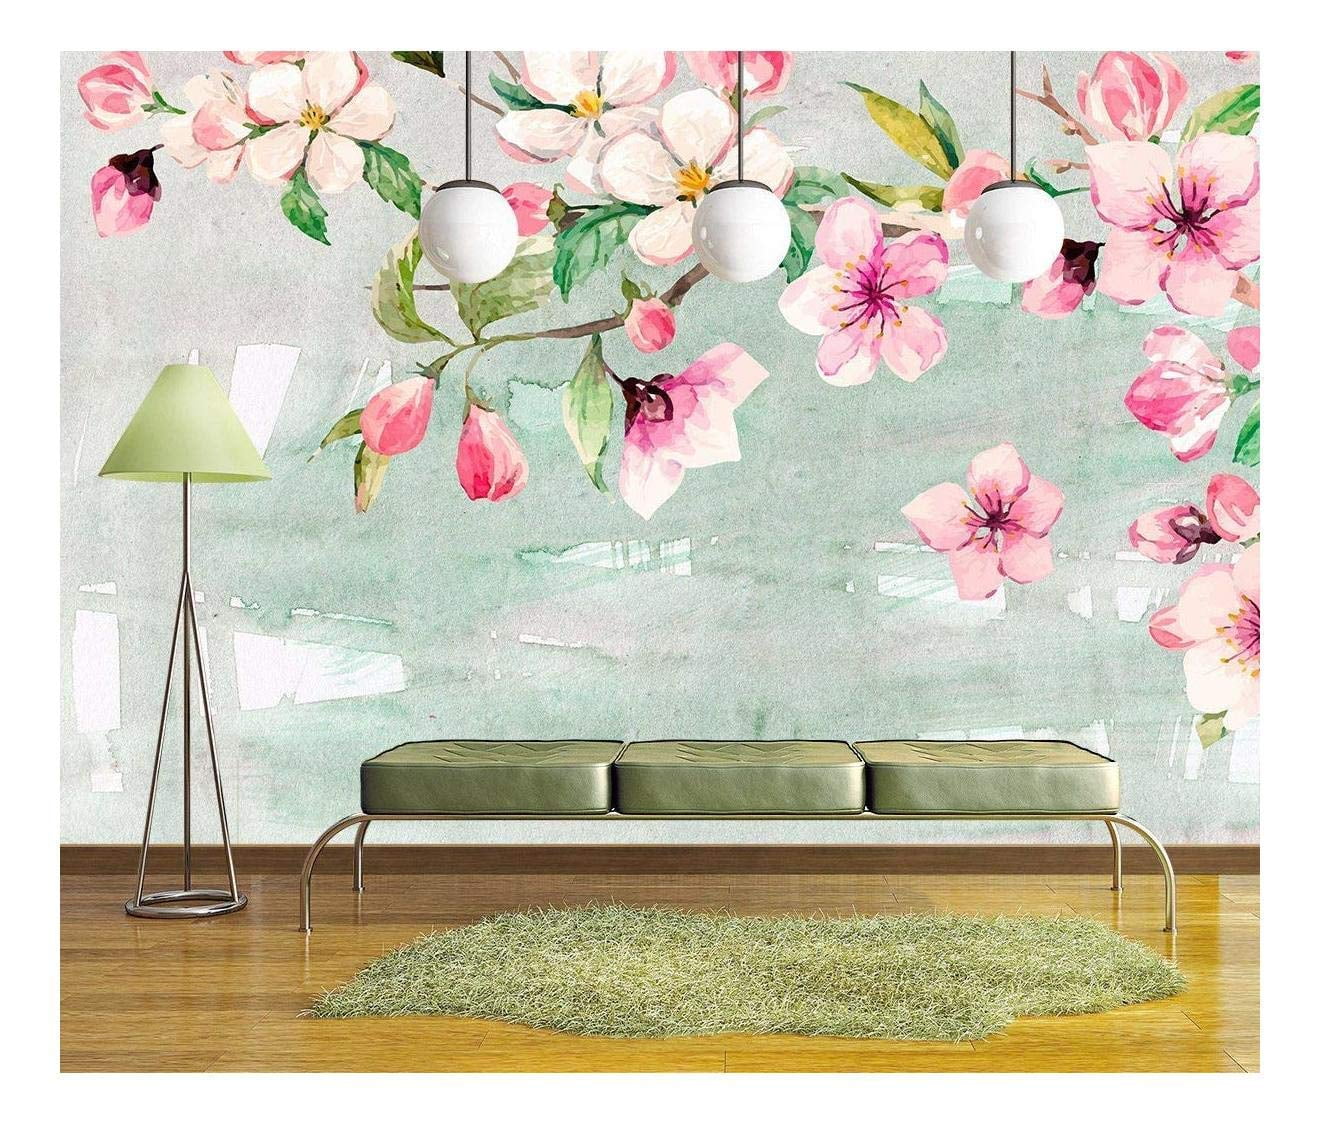 Wall26 Large Wall Mural Watercolor Style Ink Painting Pink Cherry